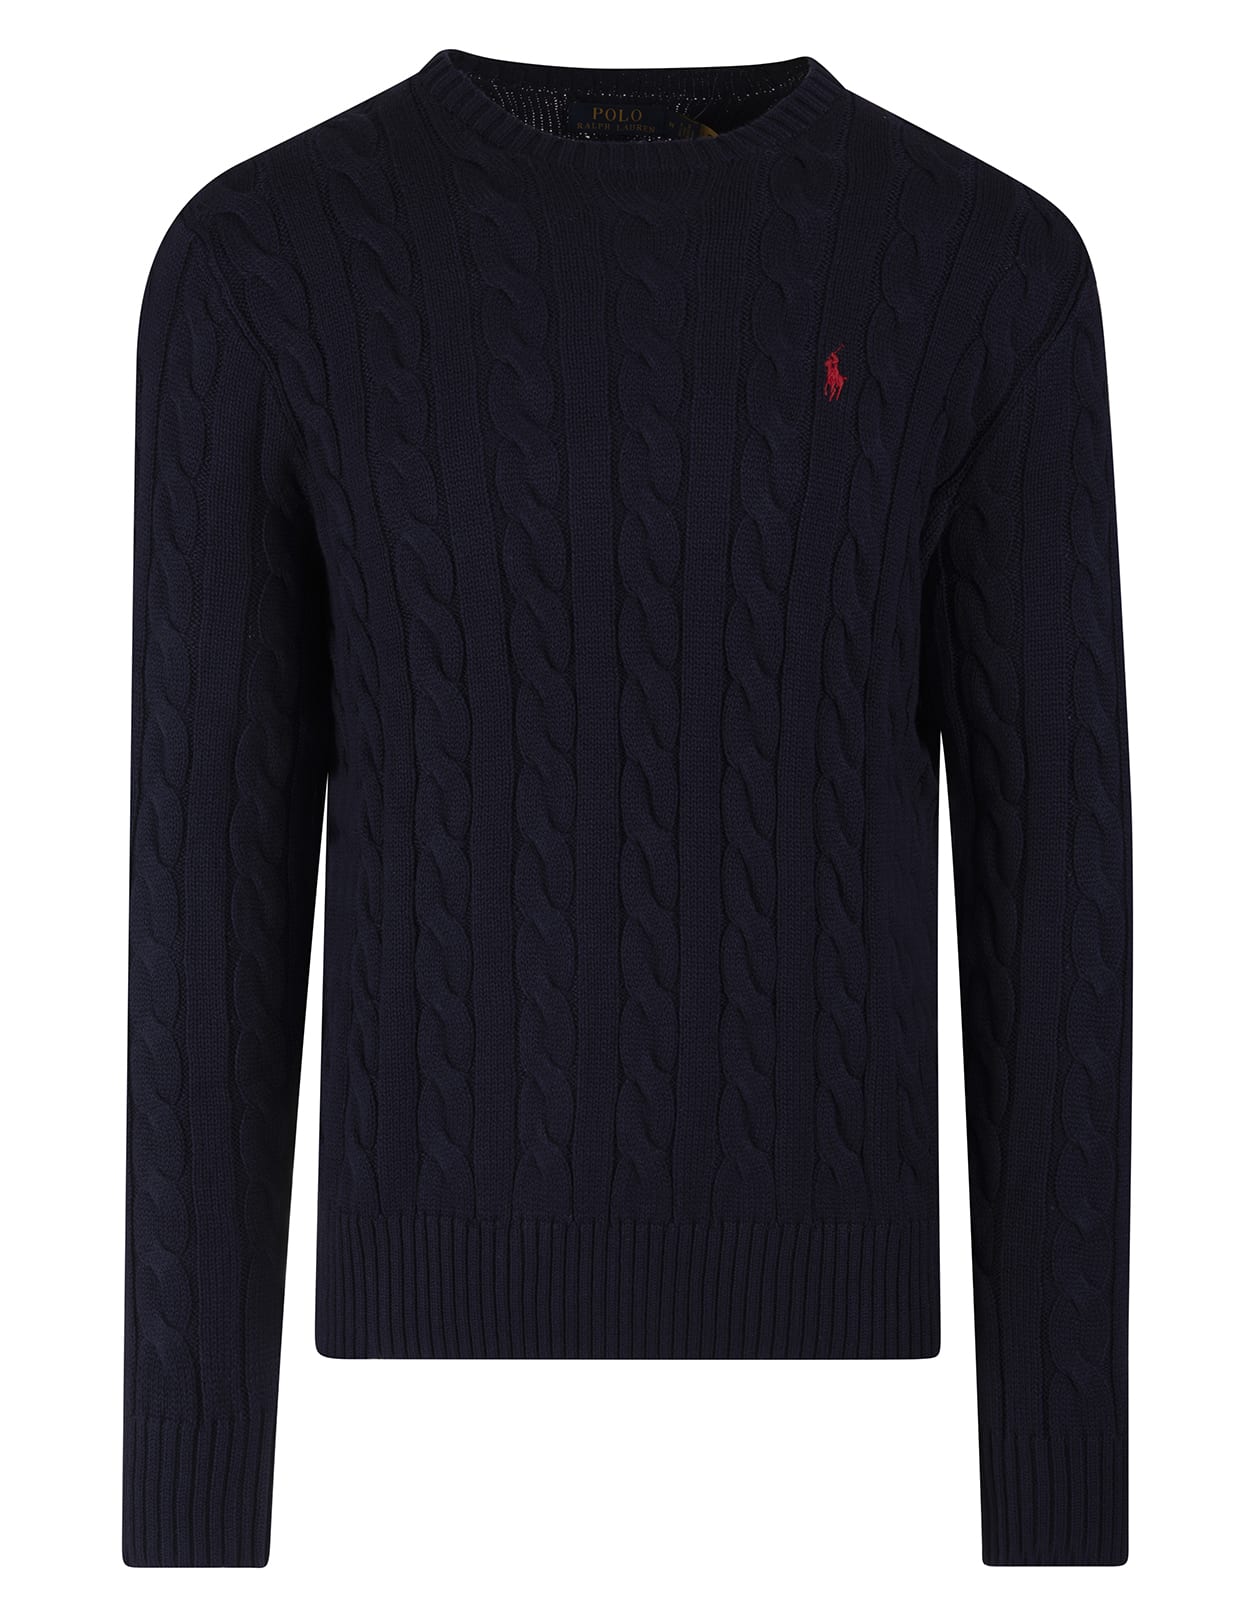 Ralph Lauren Man Navy Blue Brided Cotton Sweater With Red Pony